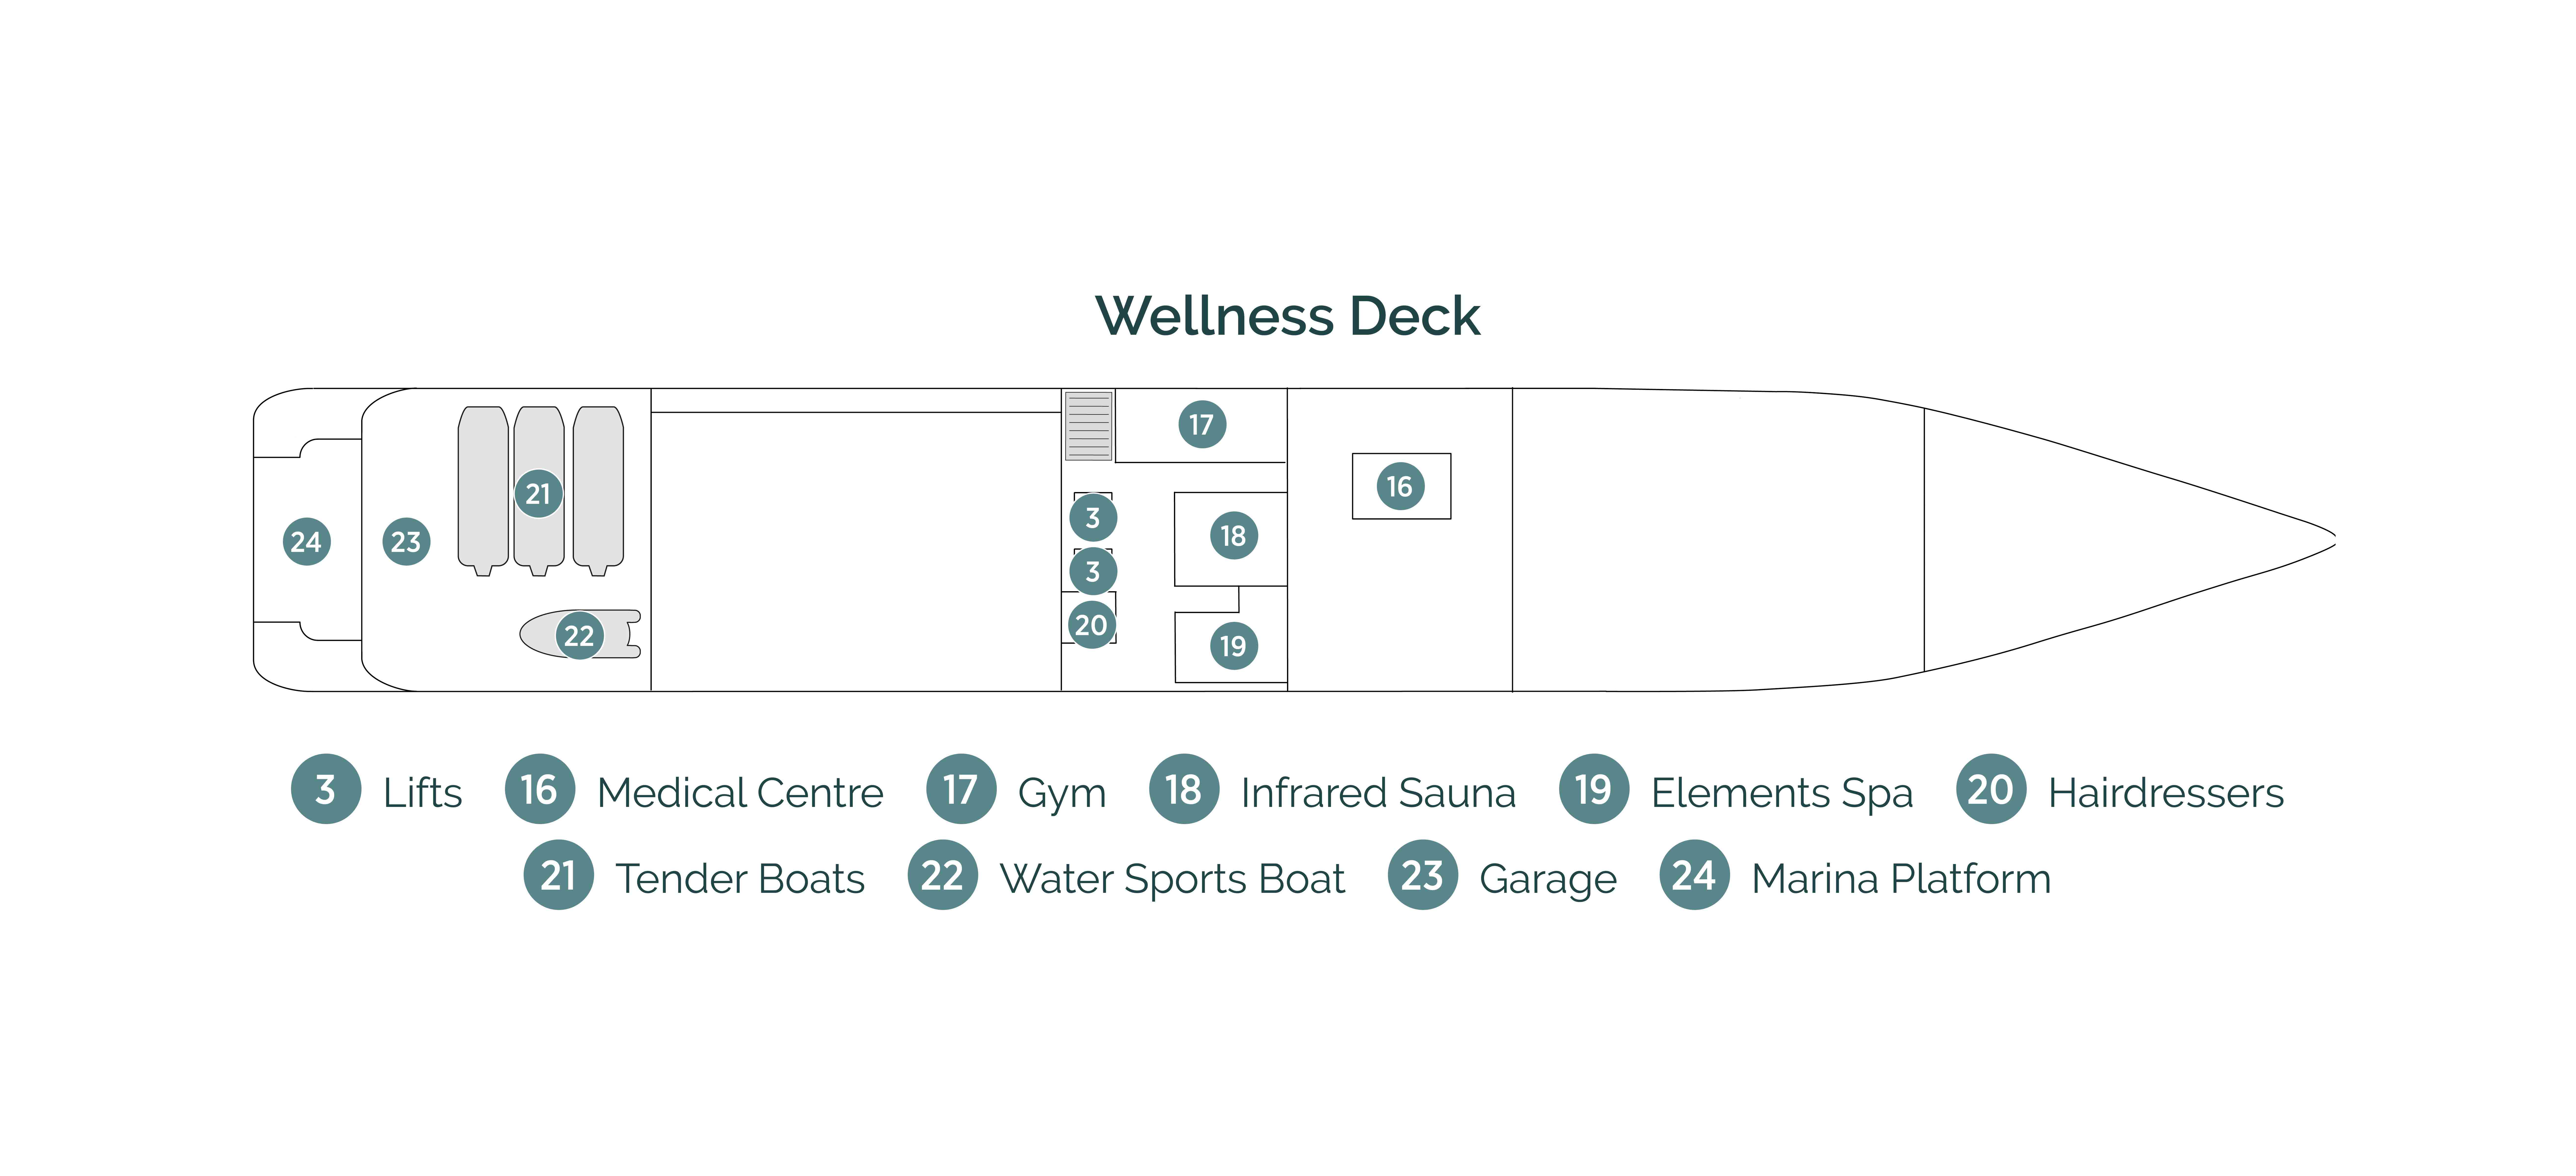 Diagram of ship layout for the Wellness Deck of an Emerald Cruises luxury yacht